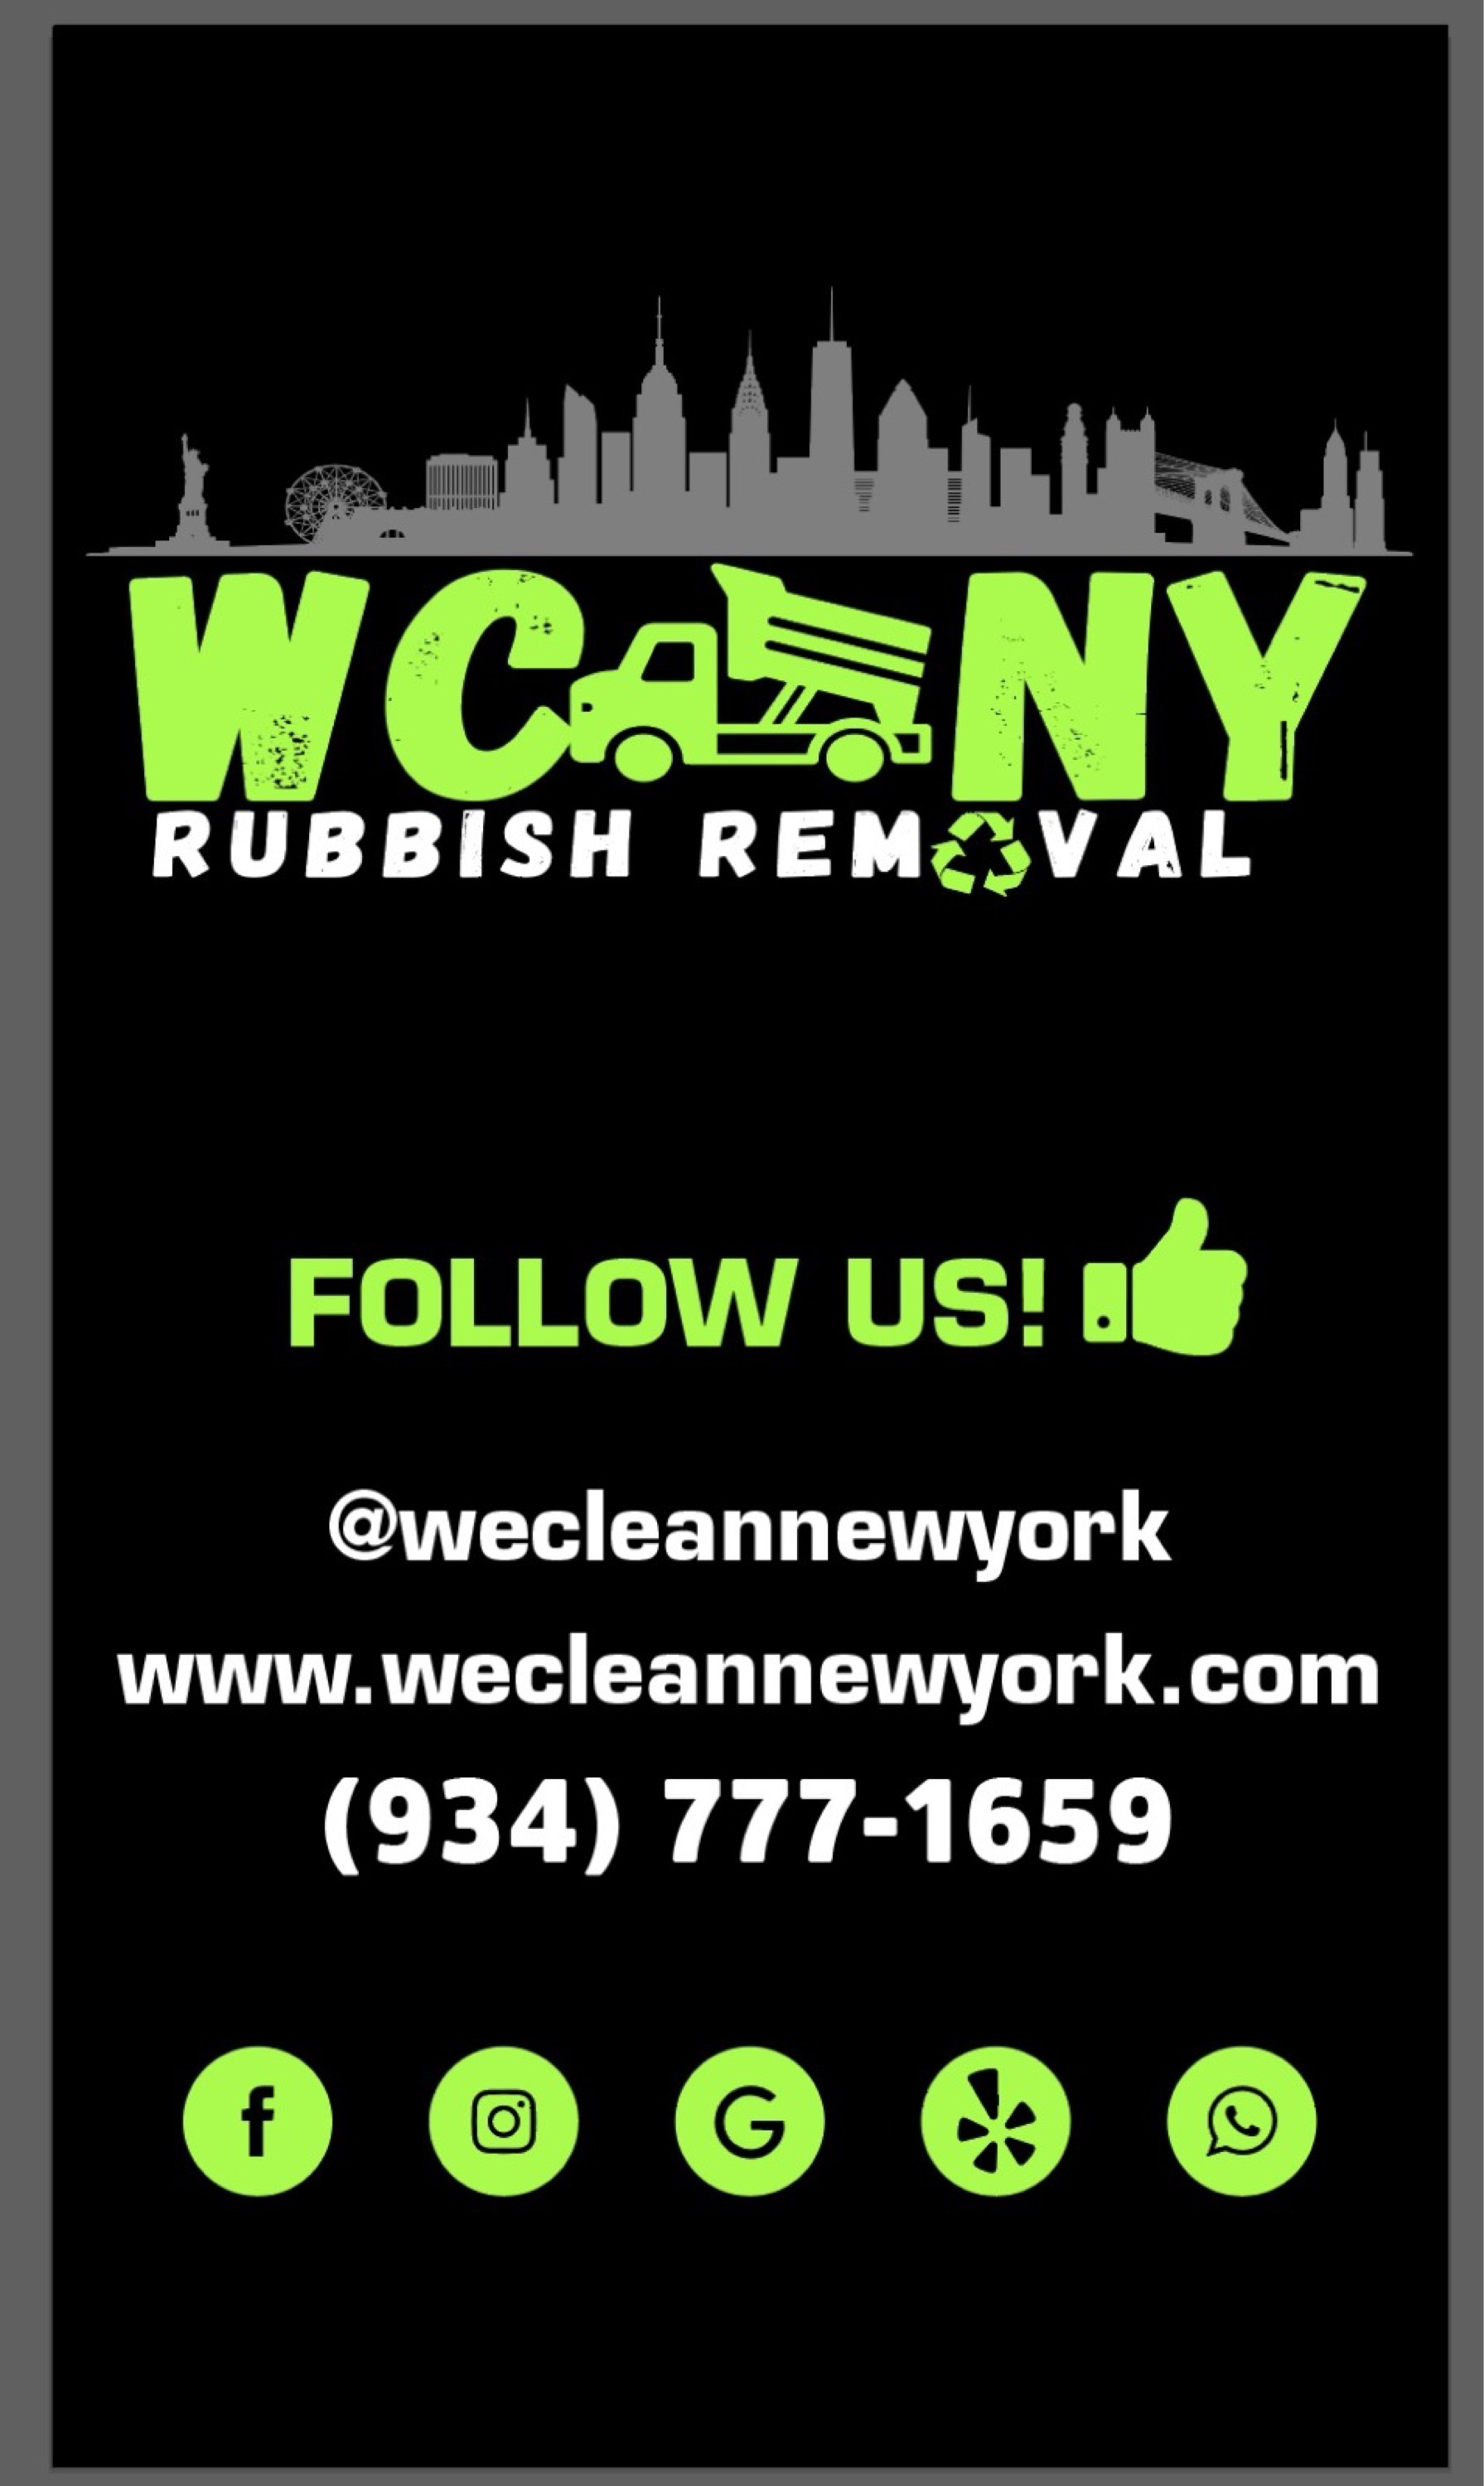 We Clean New York Rubbish Removal Logo